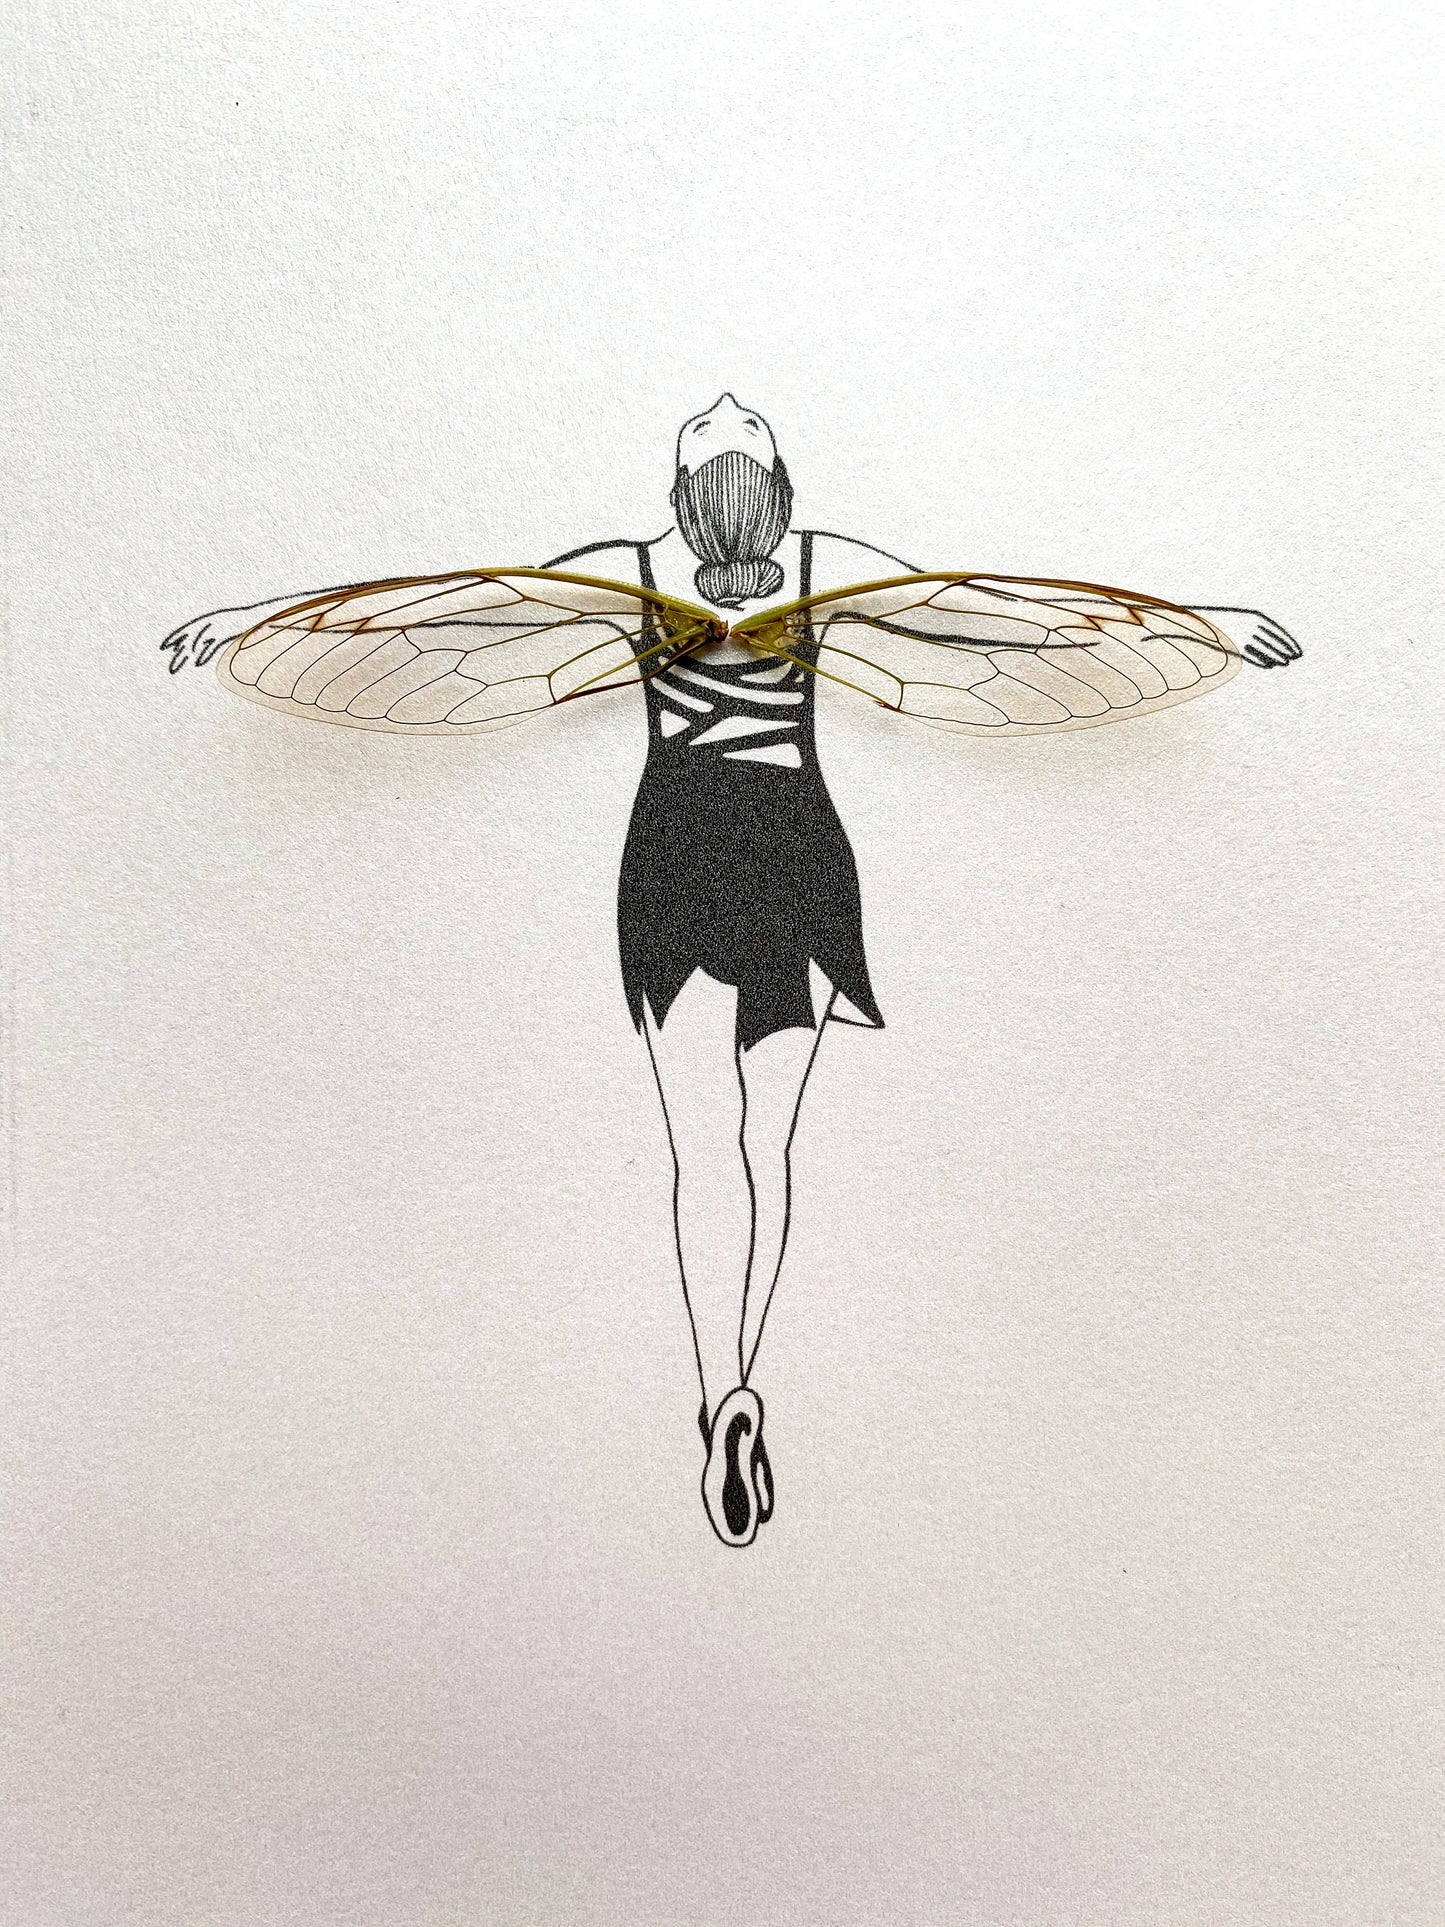 Ballerina Fairy Dancer Real Butterfly Wings Frame Illustration From and For Conservation